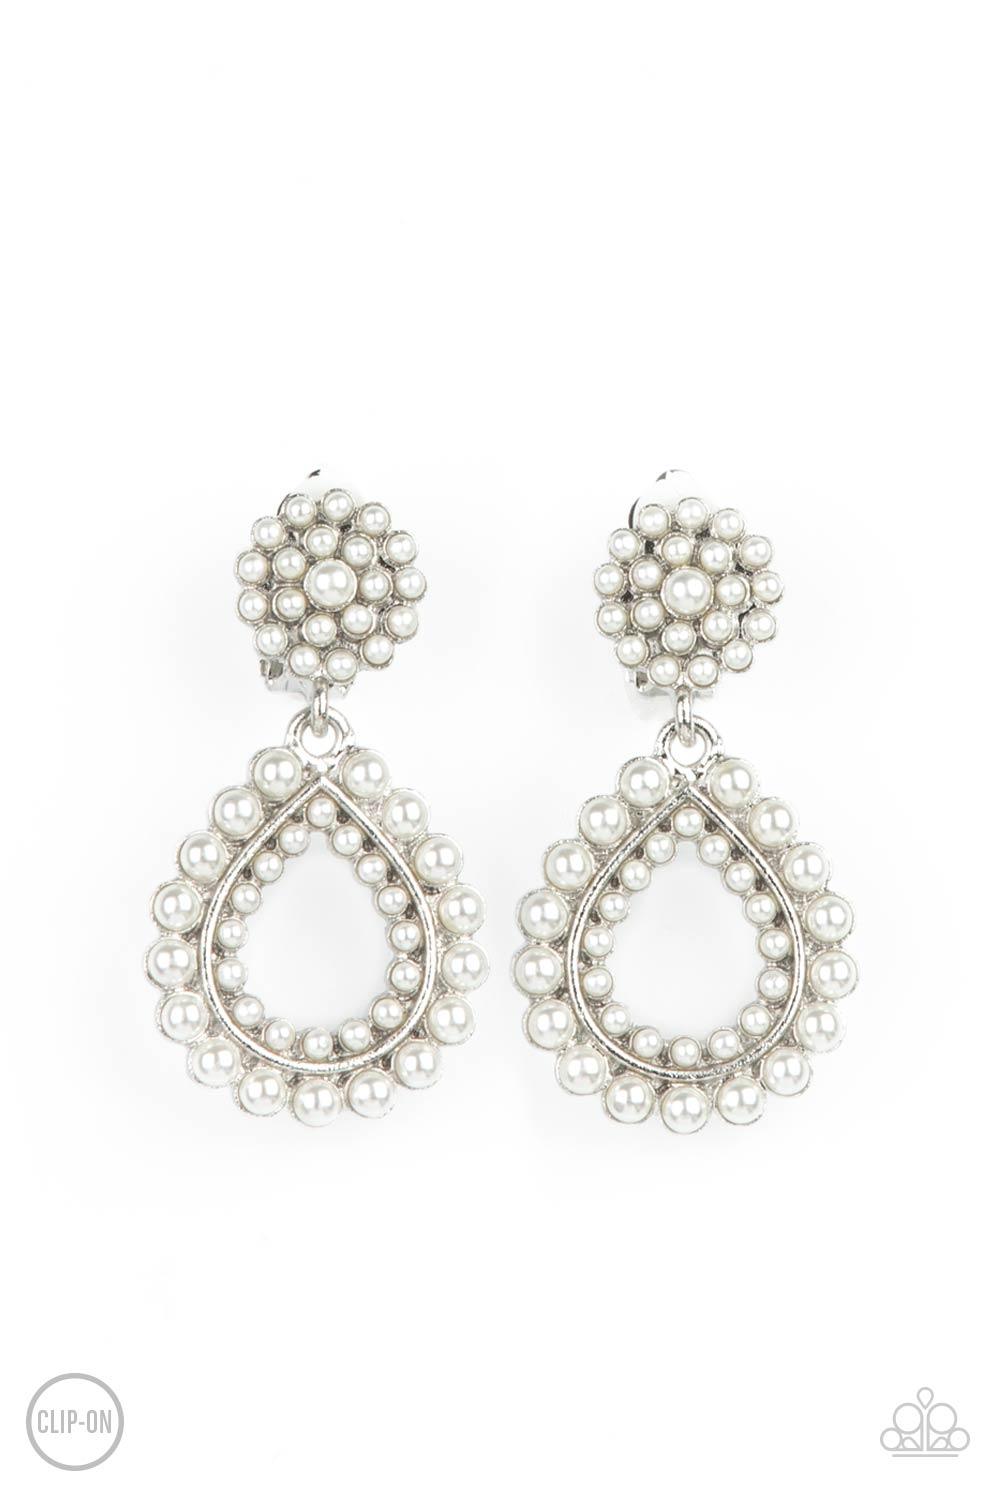 Paparazzi Accessories Discerning Droplets - White *Clip-On Droplets of pearls dot the surface of a silver teardrop frame that suspends from a round pearl encrusted disc for a classic finish. Earring attaches to a standard clip-on fitting. Sold as one pair